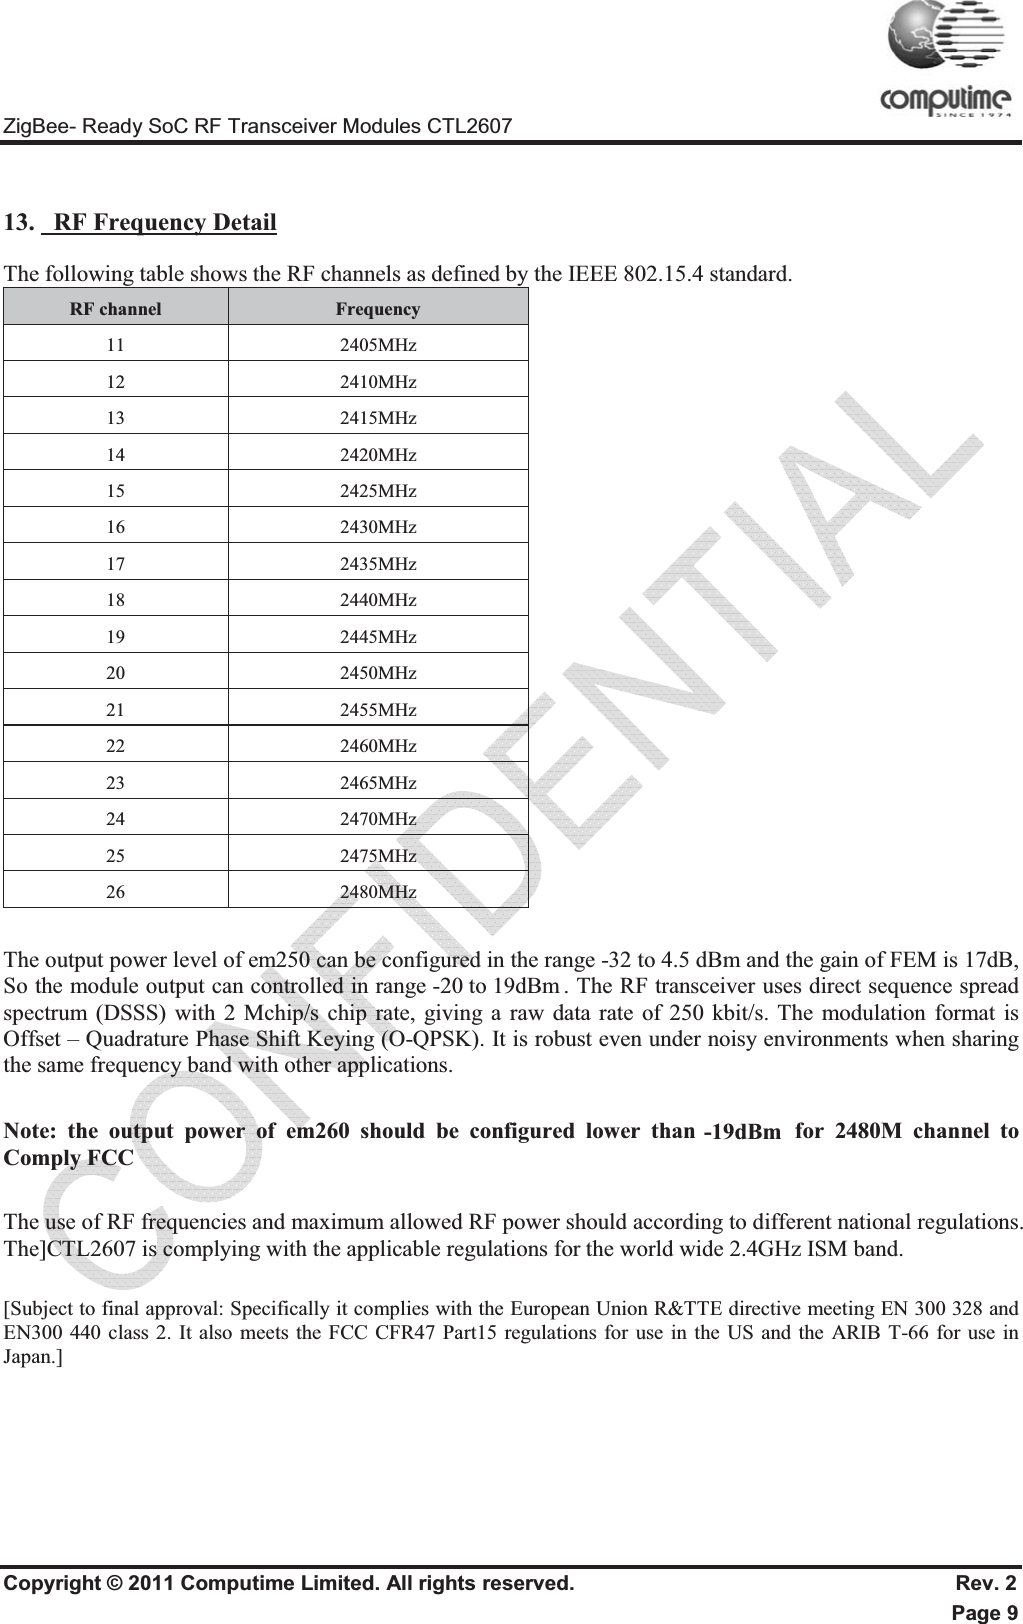 ZigBee- Ready SoC RF Transceiver Modules CTL2607 Copyright © 2011 Computime Limited. All rights reserved.                                                       Rev. 2 Page 9 13.   RF Frequency DetailThe following table shows the RF channels as defined by the IEEE 802.15.4 standard. RF channel  Frequency 11 2405MHz 12 2410MHz 13 2415MHz 14 2420MHz 15 2425MHz 16 2430MHz 17 2435MHz 18 2440MHz 19 2445MHz 20 2450MHz 21 2455MHz 22 2460MHz 23 2465MHz 24 2470MHz 25 2475MHz 26 2480MHz The output power level of em250 can be configured in the range -32 to 4.5 dBm and the gain of FEM is 17dB, So the module output can controlled in range -15 to 20dBm. The RF transceiver uses direct sequence spread spectrum (DSSS) with 2 Mchip/s chip rate, giving a raw data rate of 250 kbit/s. The modulation format is Offset – Quadrature Phase Shift Keying (O-QPSK). It is robust even under noisy environments when sharing the same frequency band with other applications. Note: the output power of em260 should be configured lower than -15dBm for 2480M channel to Comply FCC The use of RF frequencies and maximum allowed RF power should according to different national regulations. The]CTL2607 is complying with the applicable regulations for the world wide 2.4GHz ISM band. [Subject to final approval: Specifically it complies with the European Union R&amp;TTE directive meeting EN 300 328 and EN300 440 class 2. It also meets the FCC CFR47 Part15 regulations for use in the US and the ARIB T-66 for use in Japan.] -19dBm-20 to 19dBm